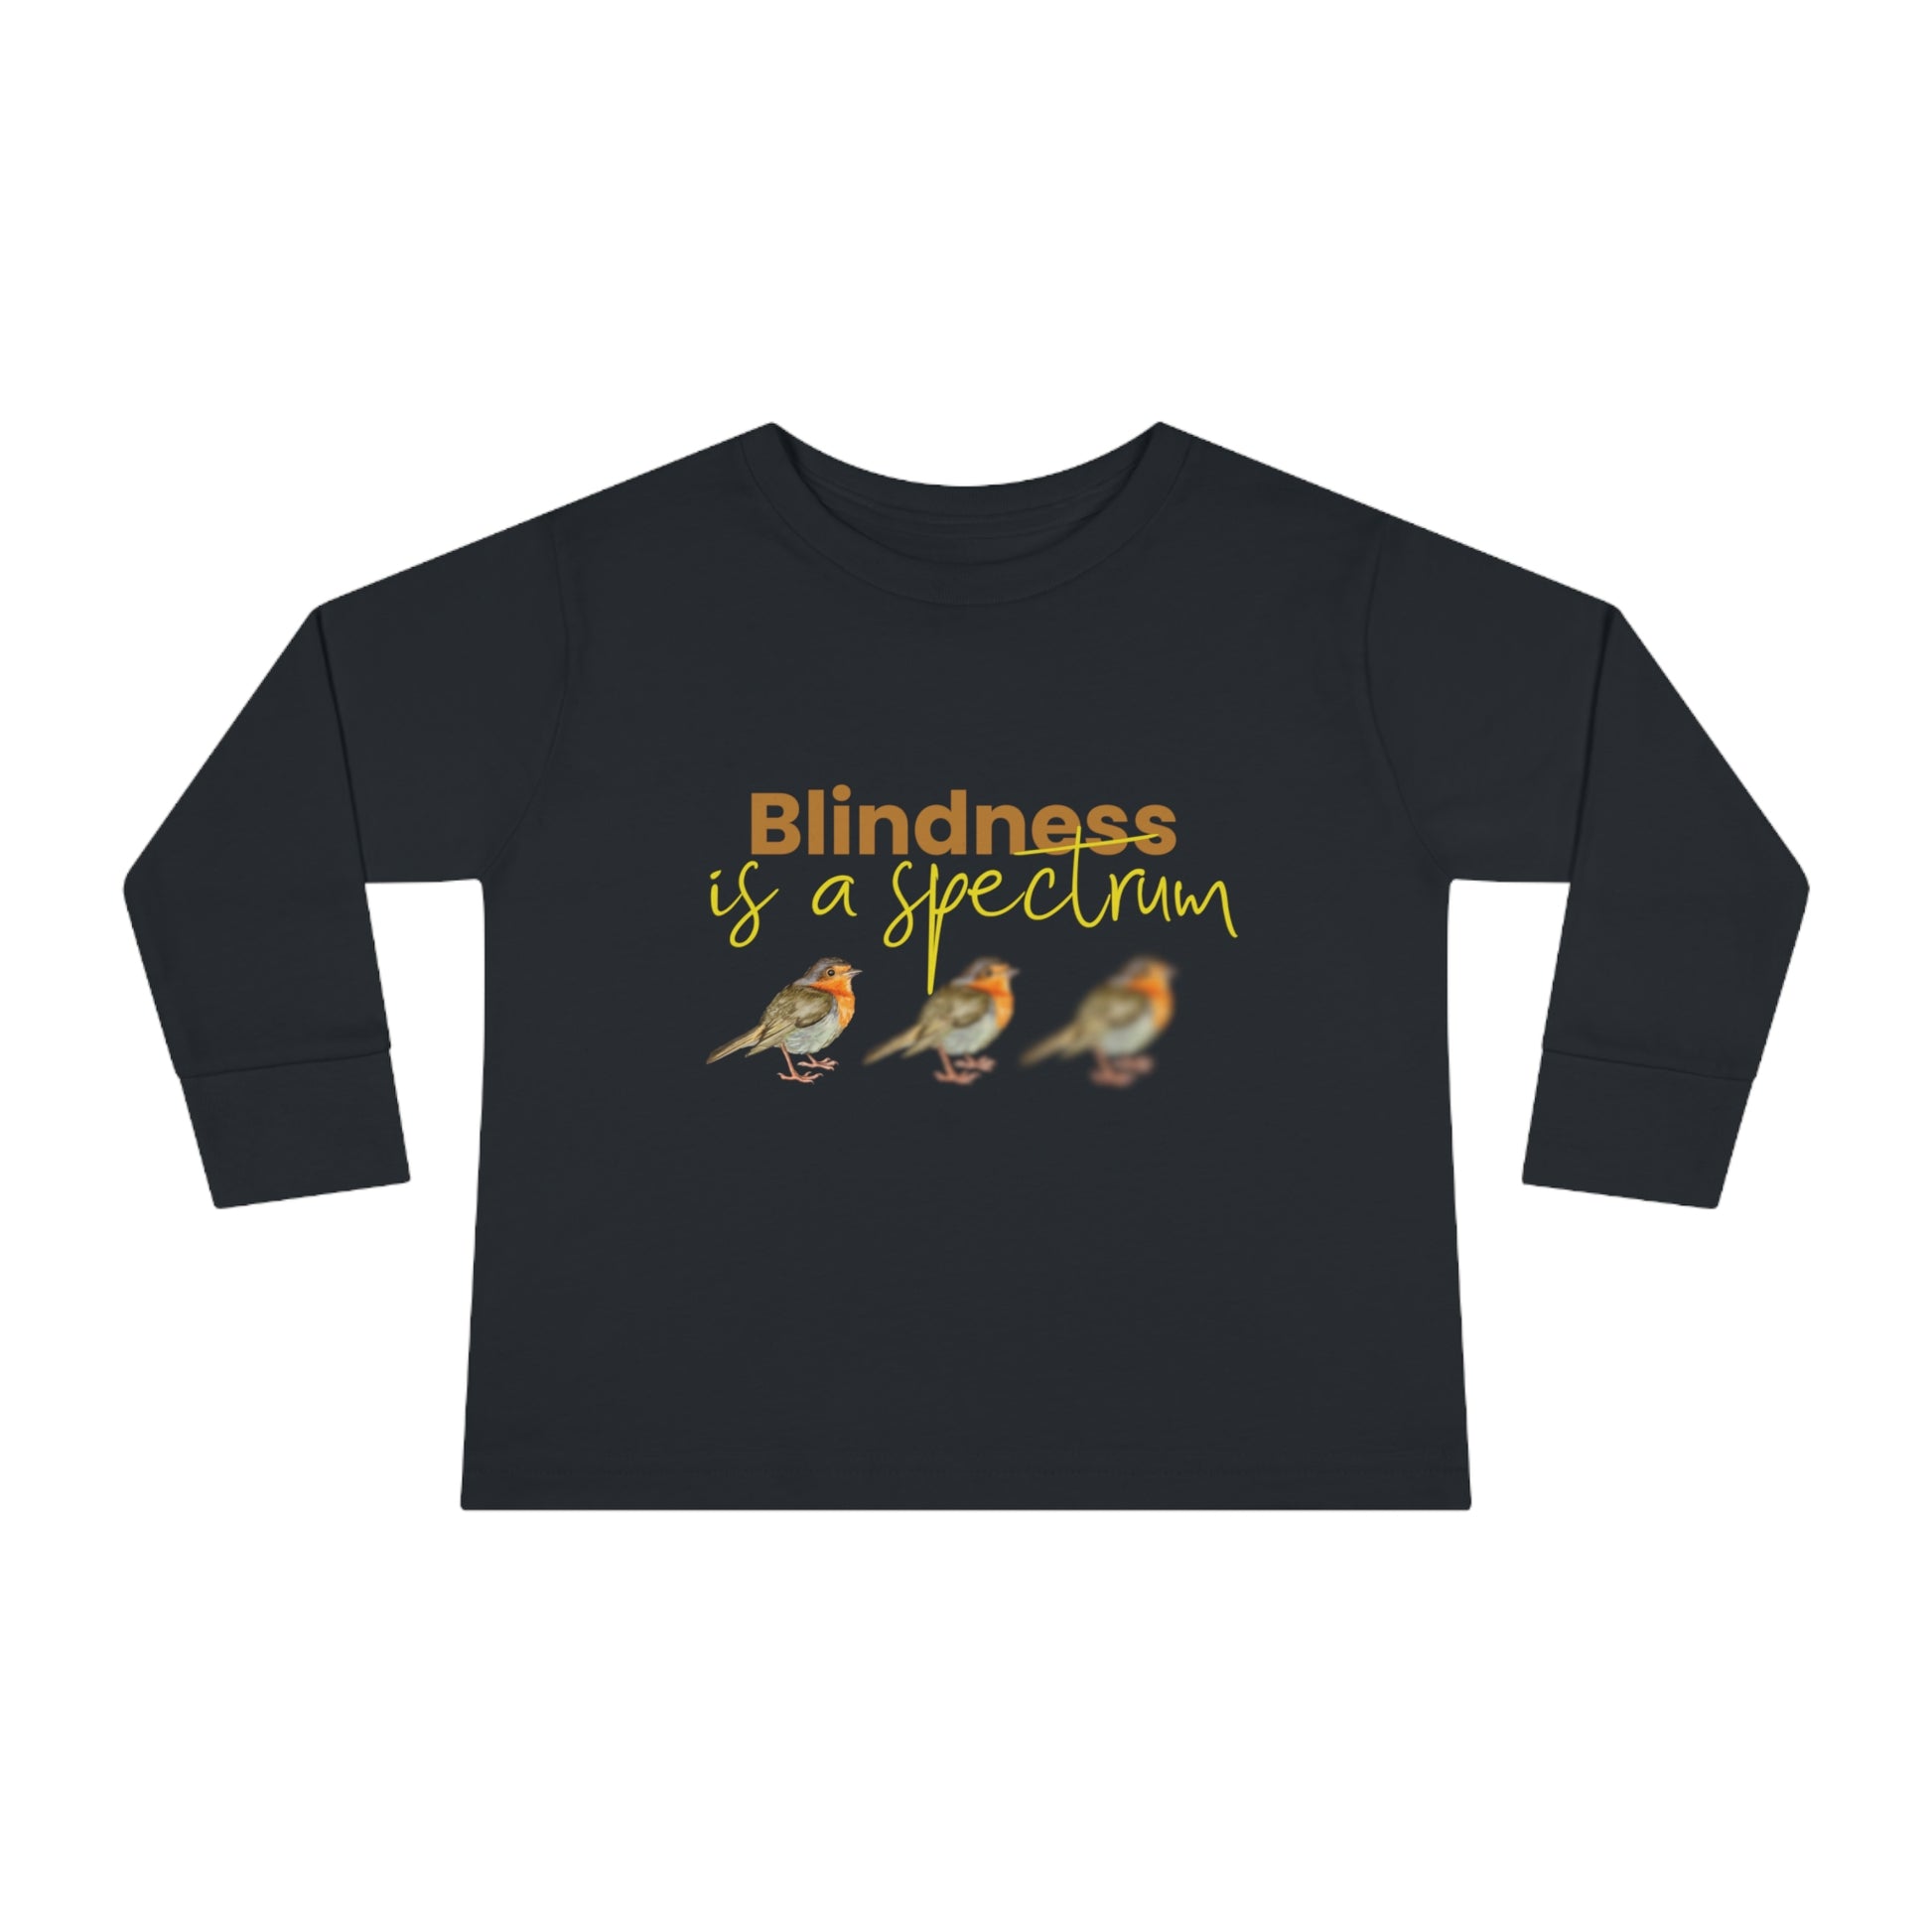 Blindness is a spectrum -Toddler Long Sleeve Tee